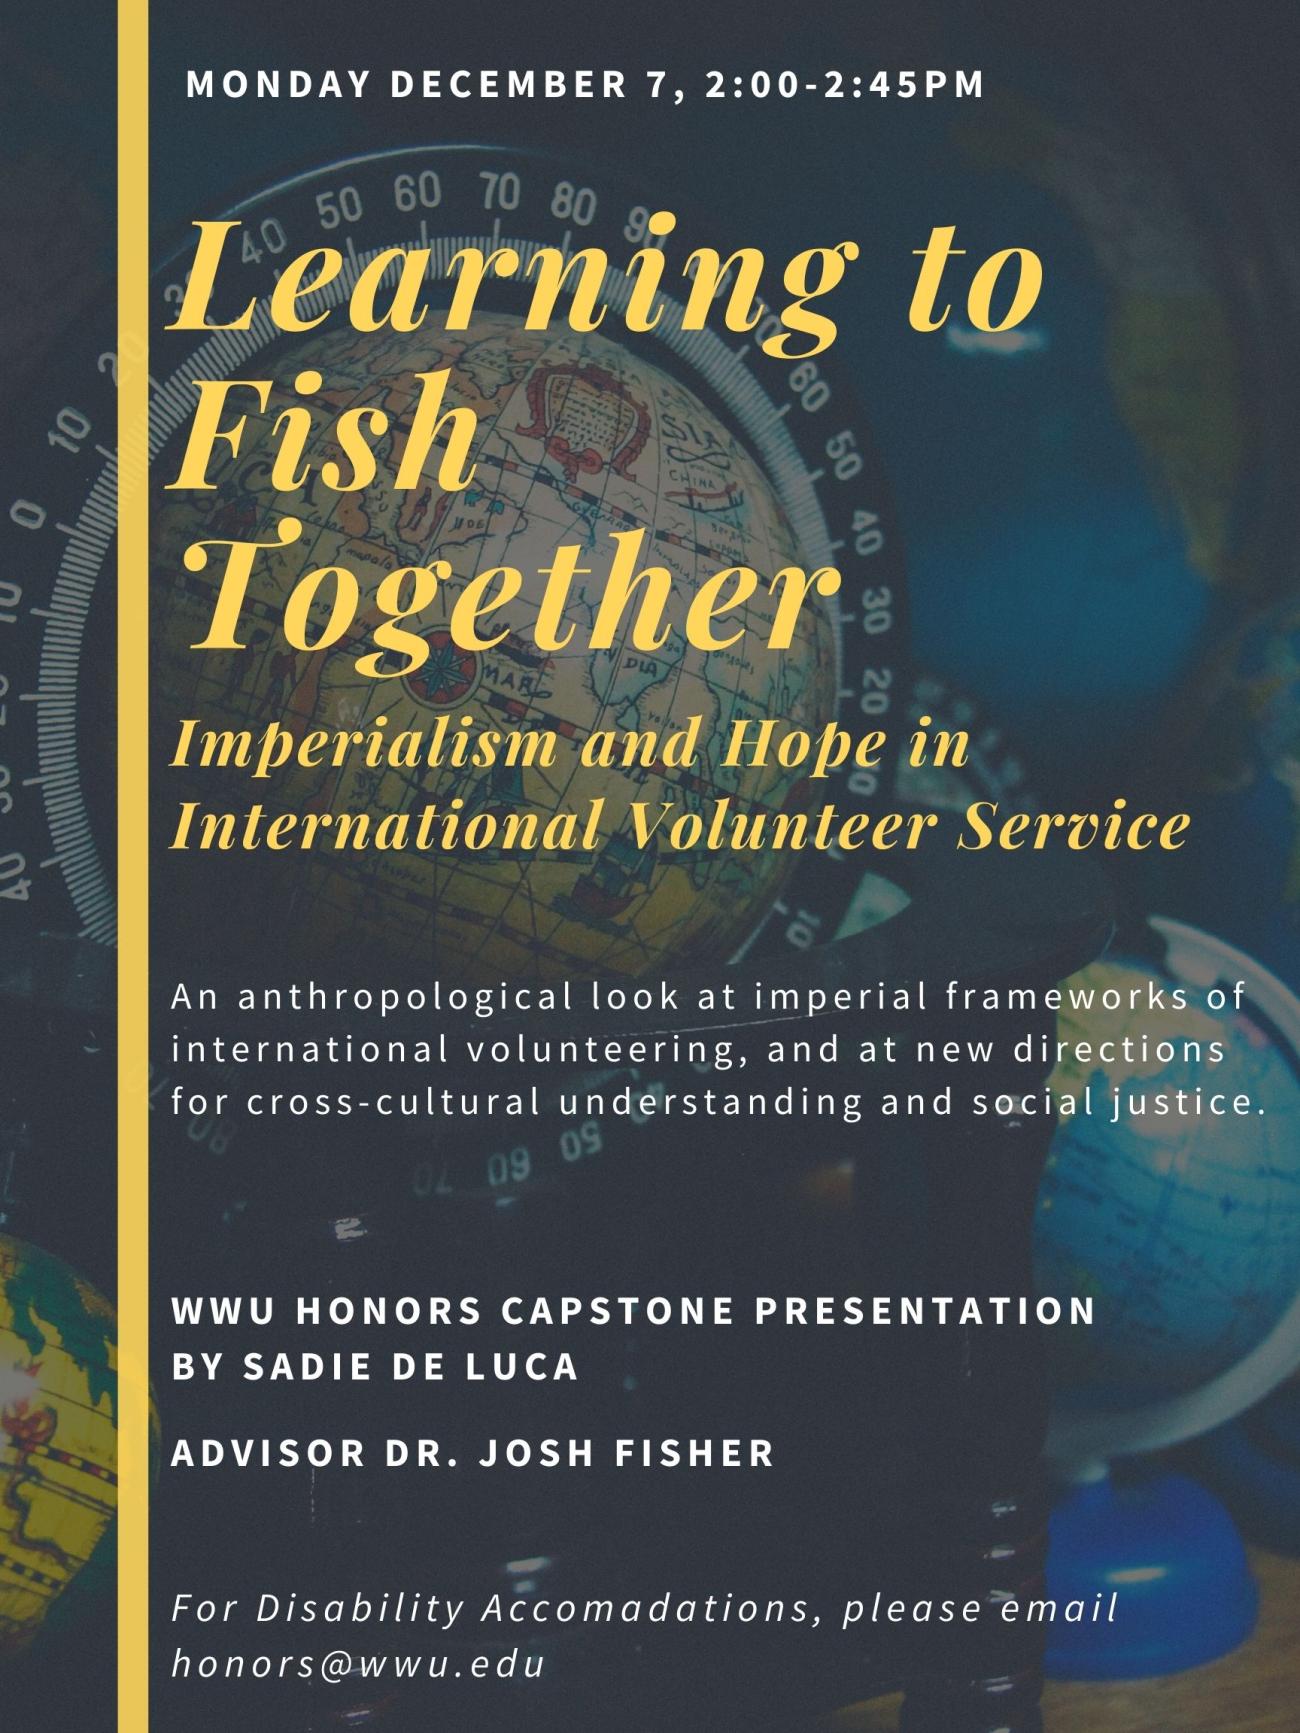 Image: Background photo of three globes in dark lighting. Text: "Learning to Fish Together: Imperialism and Hope in International Volunteer Service. An anthropological look at imperial frameworks of international volunteering, and at new directions for cross-cultural understanding and social justice. WWU Honors Capstone Presentation by Sadie De Luca. Advisor Dr. Josh Fisher. Monday December 7th, 2:00-2:45pm. For Disability Accomodations, please email honors@wwu.edu."